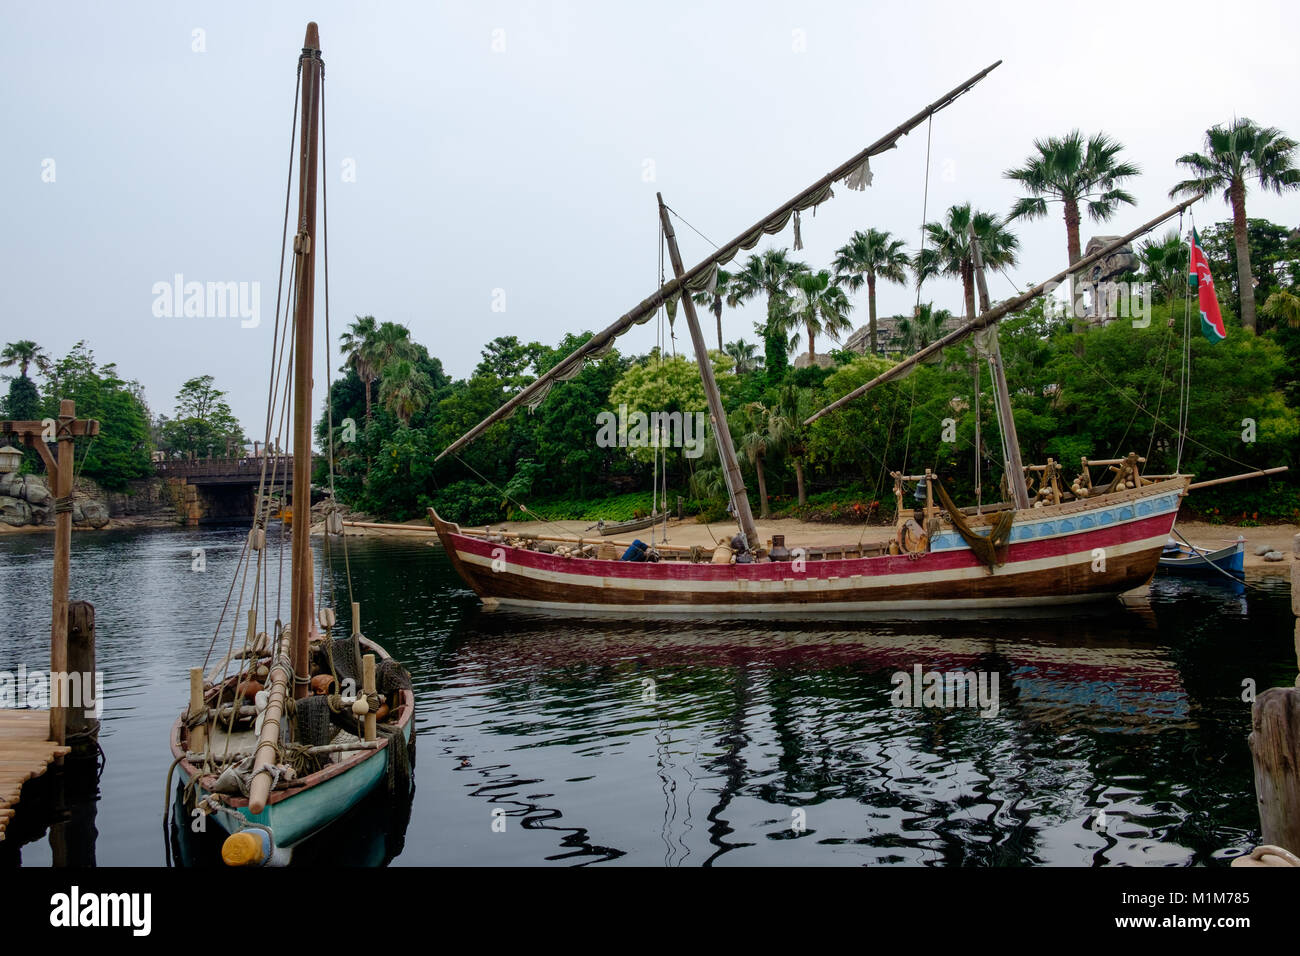 Two boats on the river with sails furled and the dock on the left. Palm trees in the background. Stock Photo